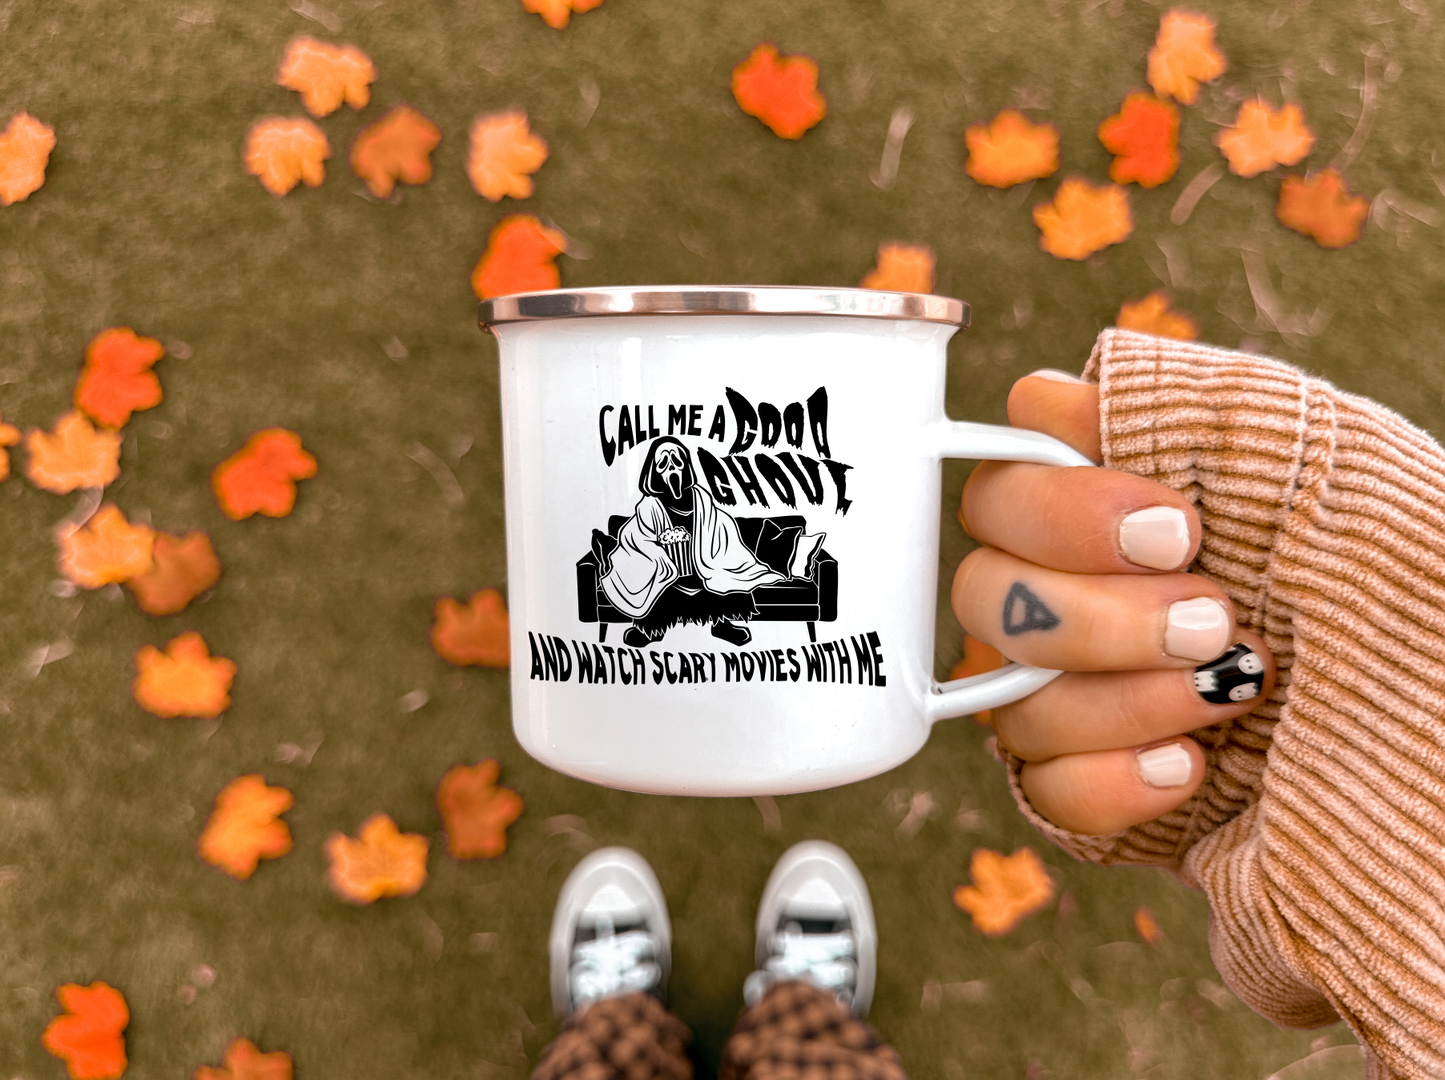 call me a good ghoul and watch scary movies with me enamel mug